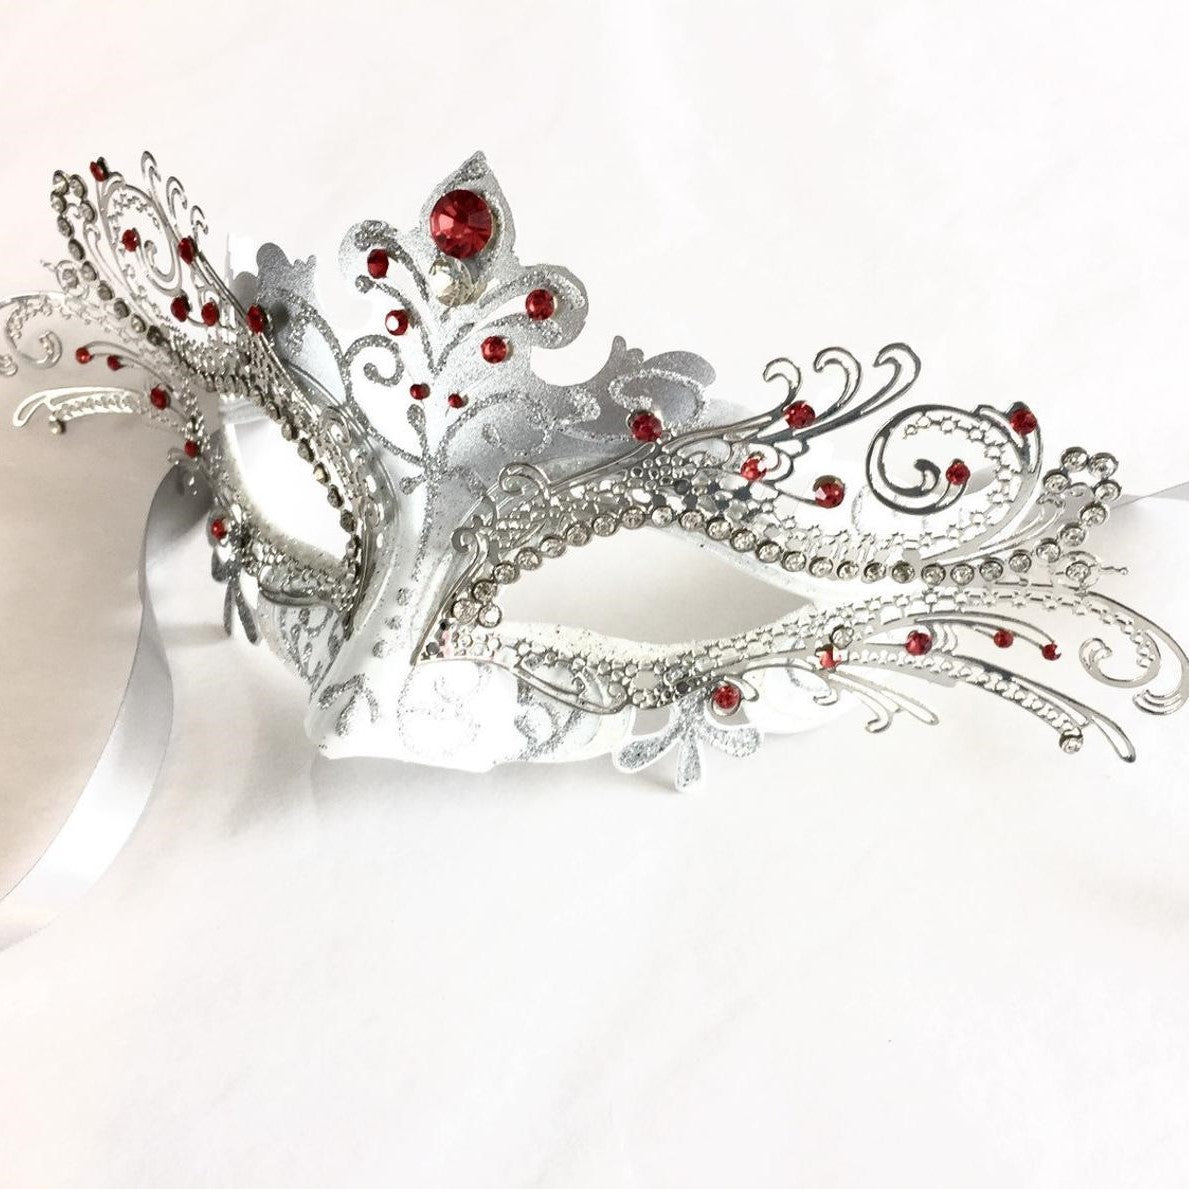 Fox Masquerade Mask in Silver and White White/Gold / Purple/Crystal Mix